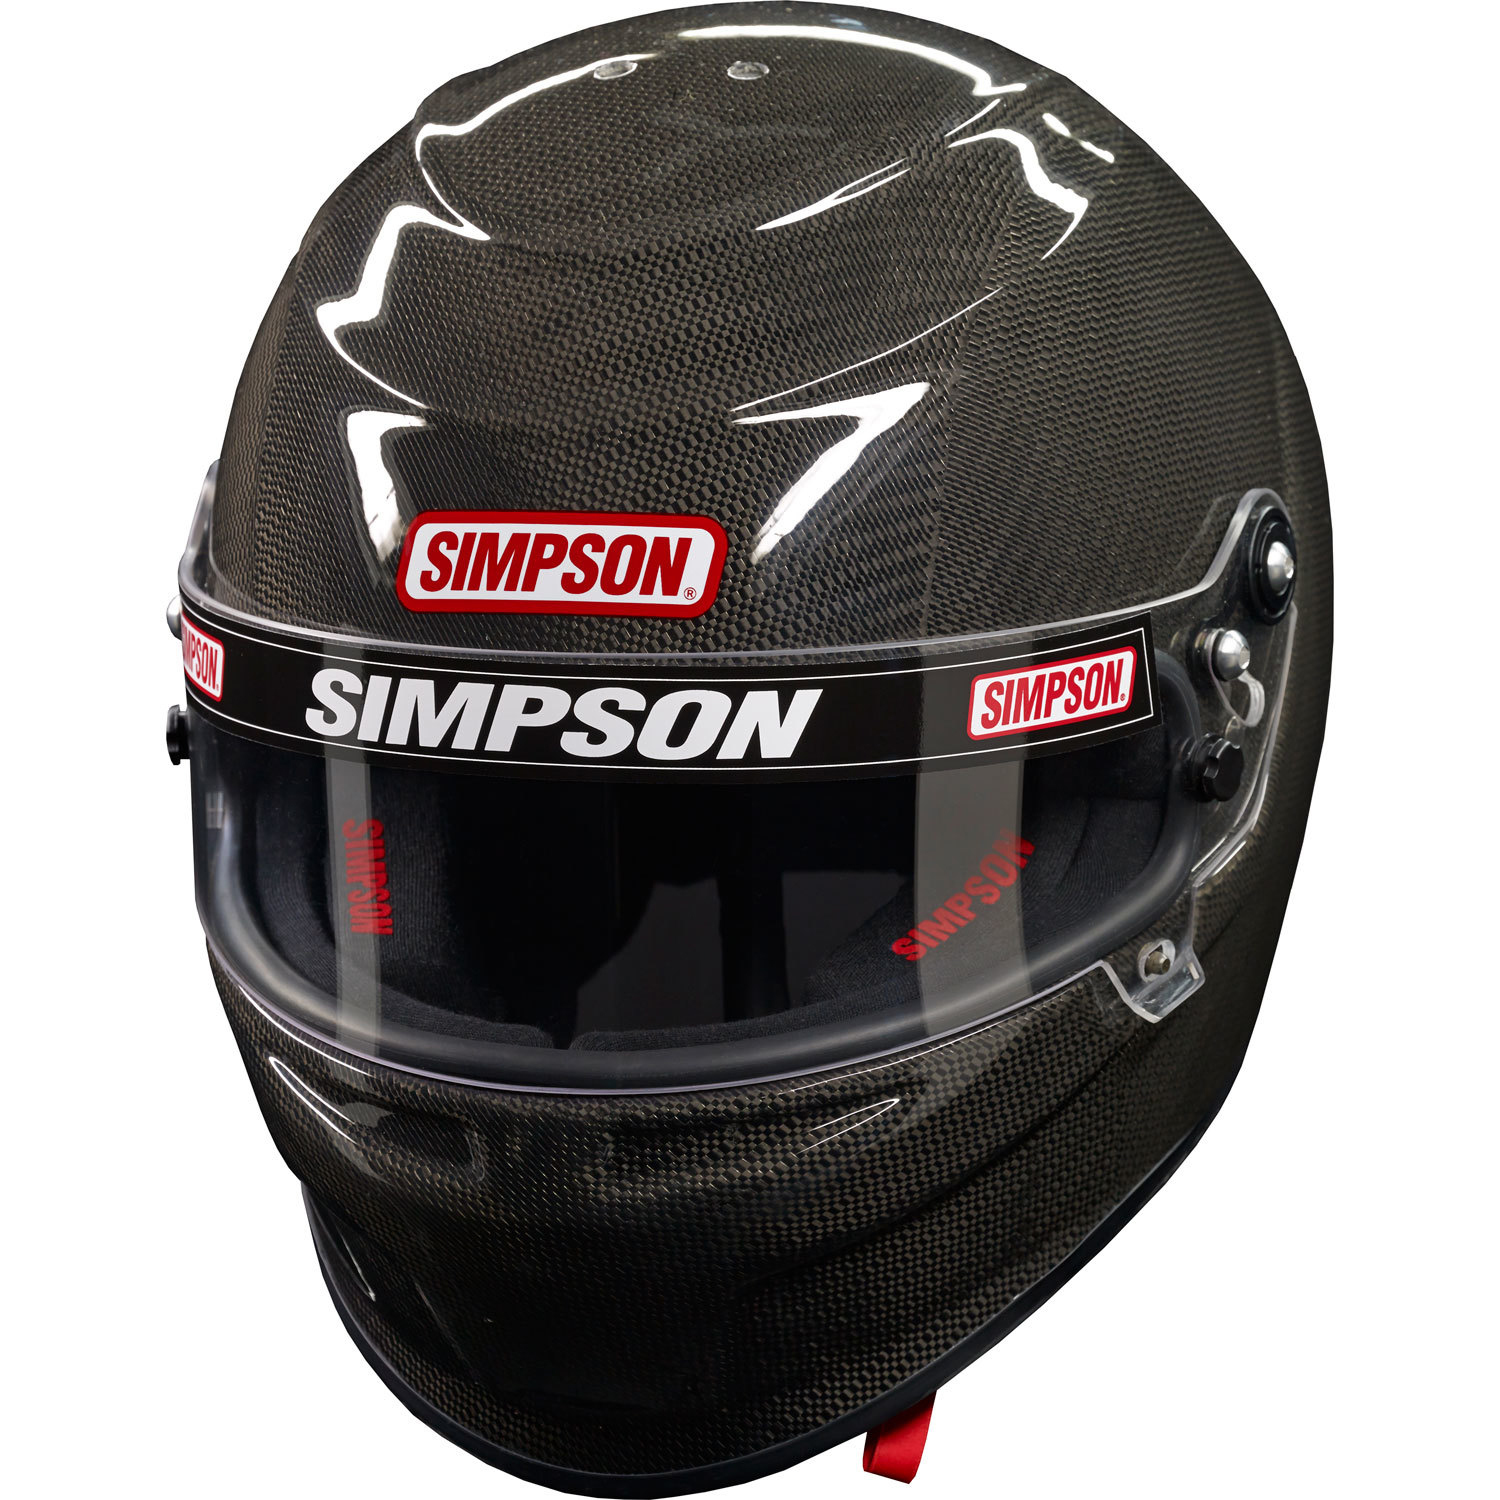 Simpson Safety 785004C Helmet, Venator, Snell SA2020, Head and Neck Support Ready, Carbon Fiber, Large, Each